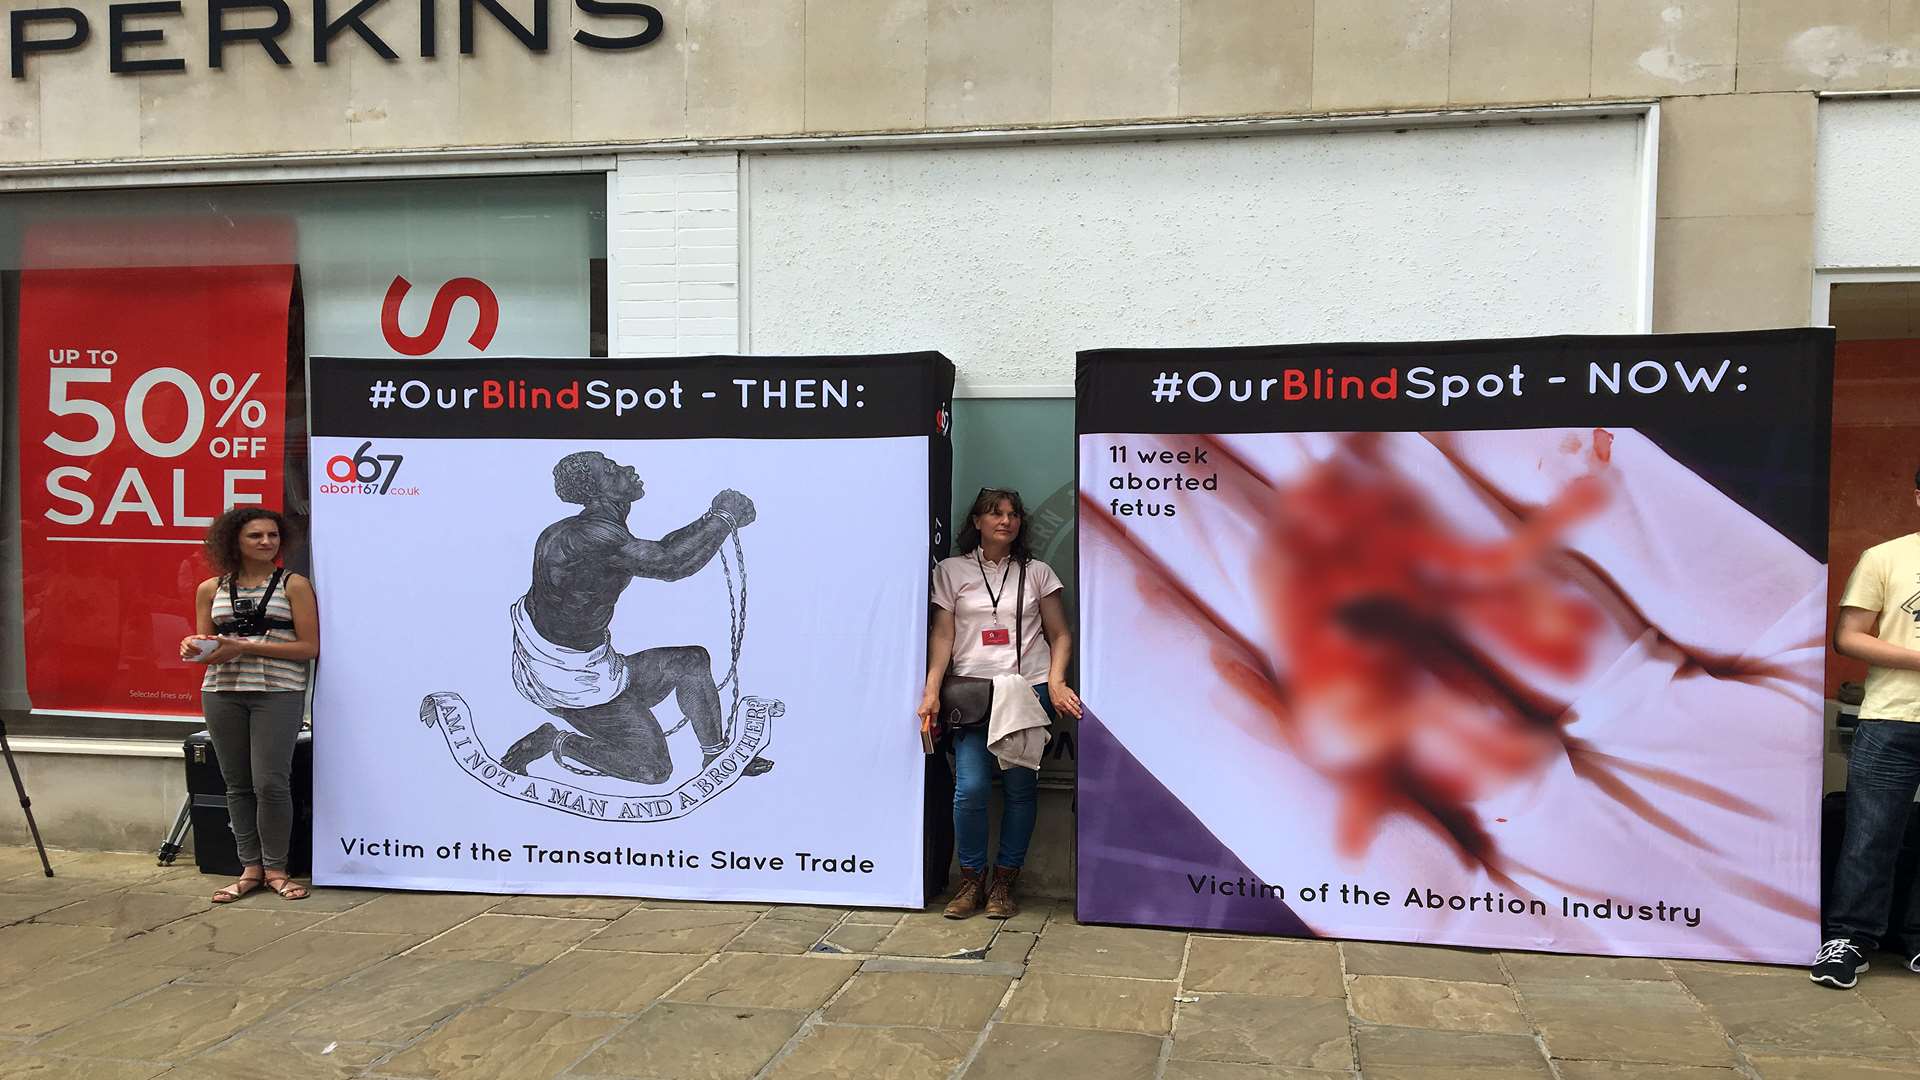 The anti-abortion display by Abort67 showing a harrowing image of an aborted fetus which we have blurred